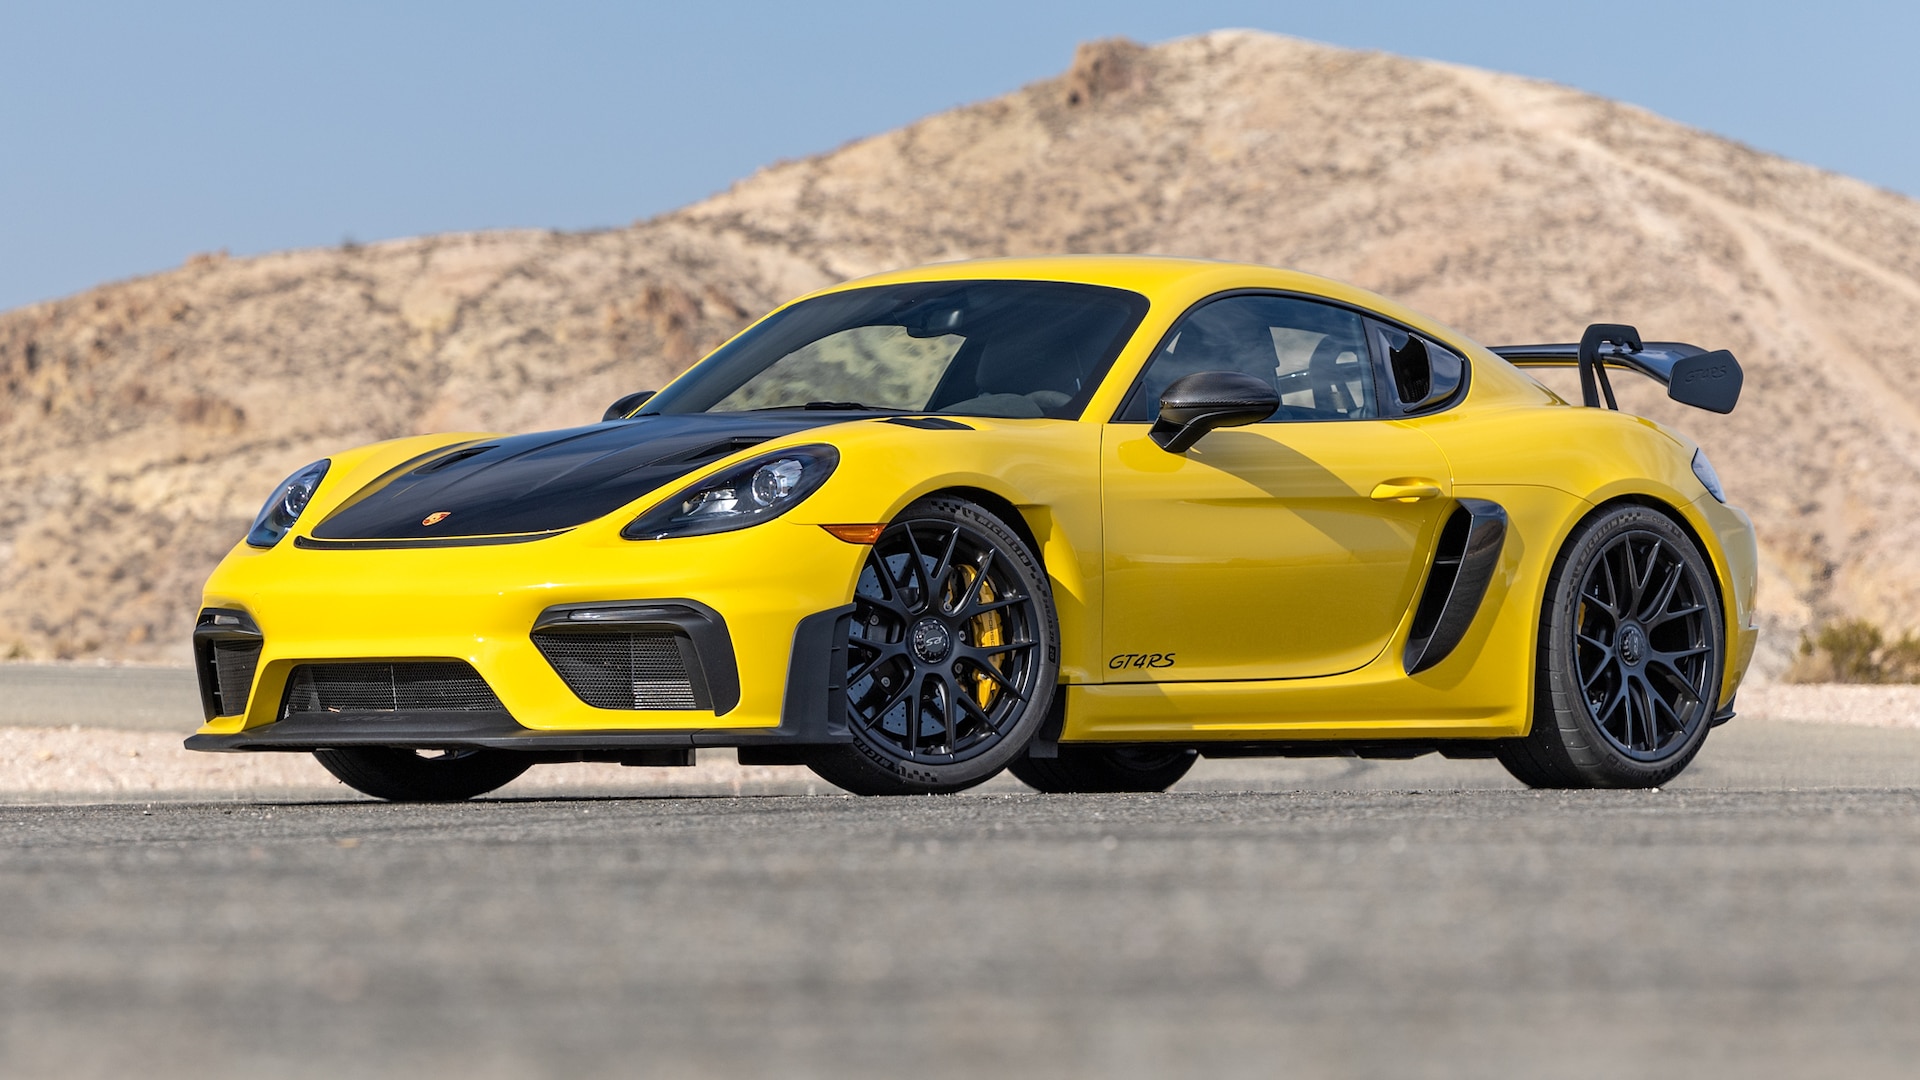 2023 Porsche 718 Cayman Prices, Reviews, and Photos - MotorTrend